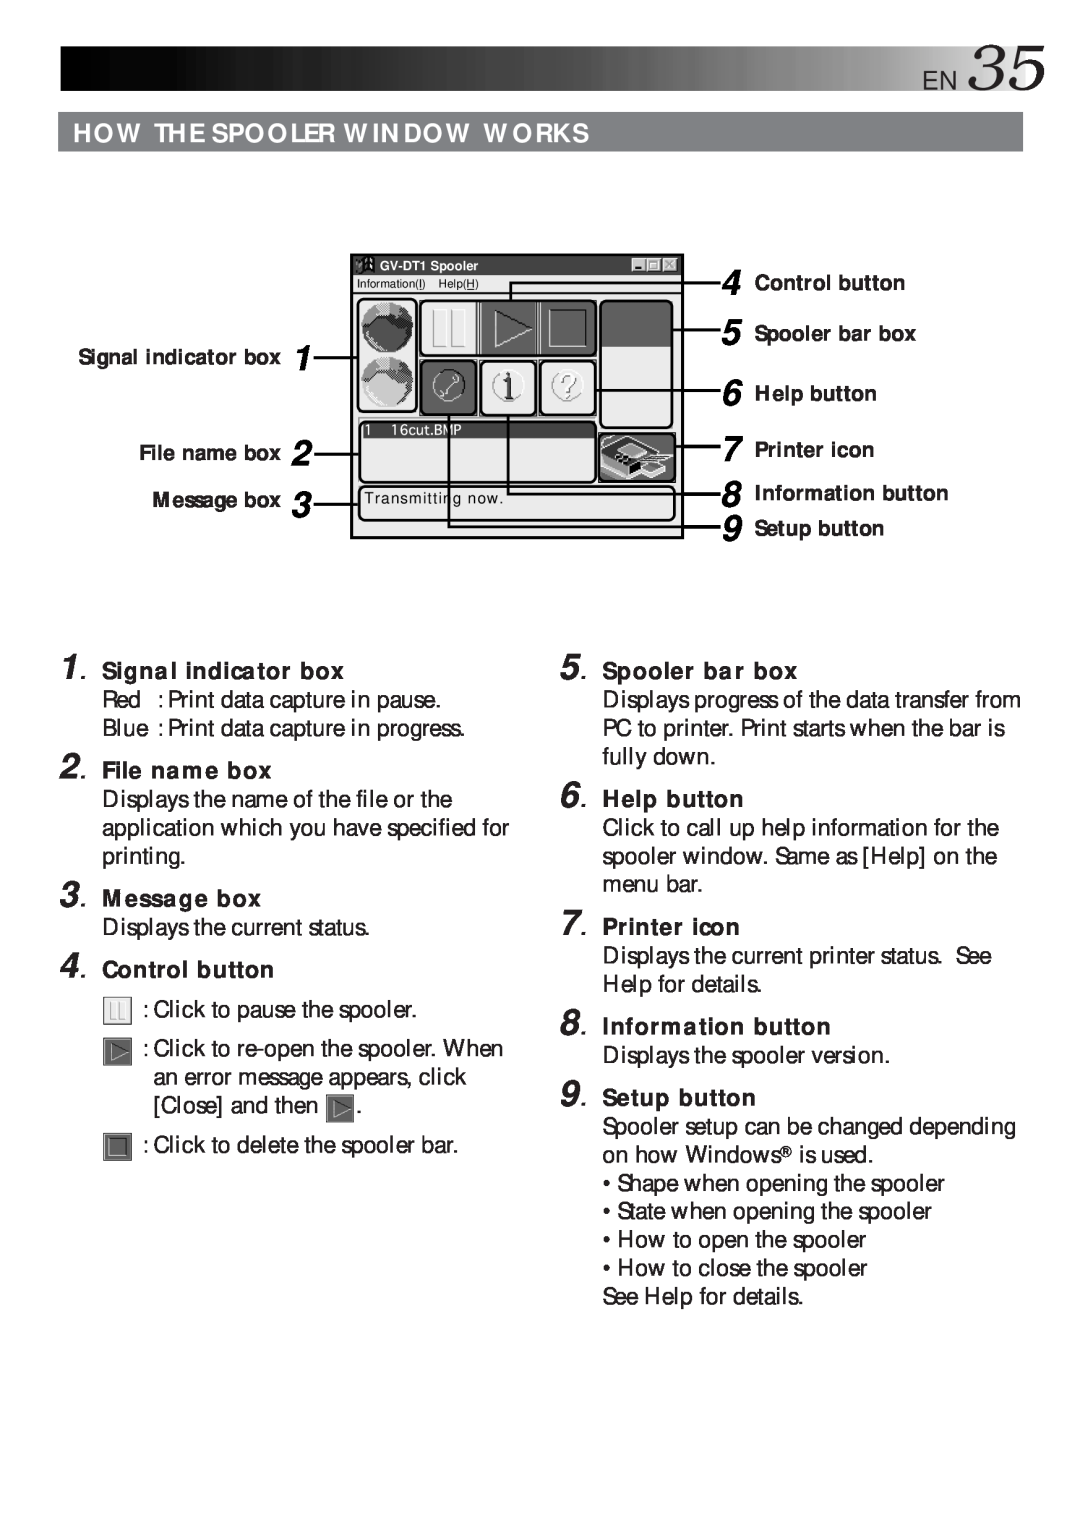 JVC LYT0119-001A How The Spooler Window Works, Control button, Spooler bar box, Help button, File name box, Printer icon 